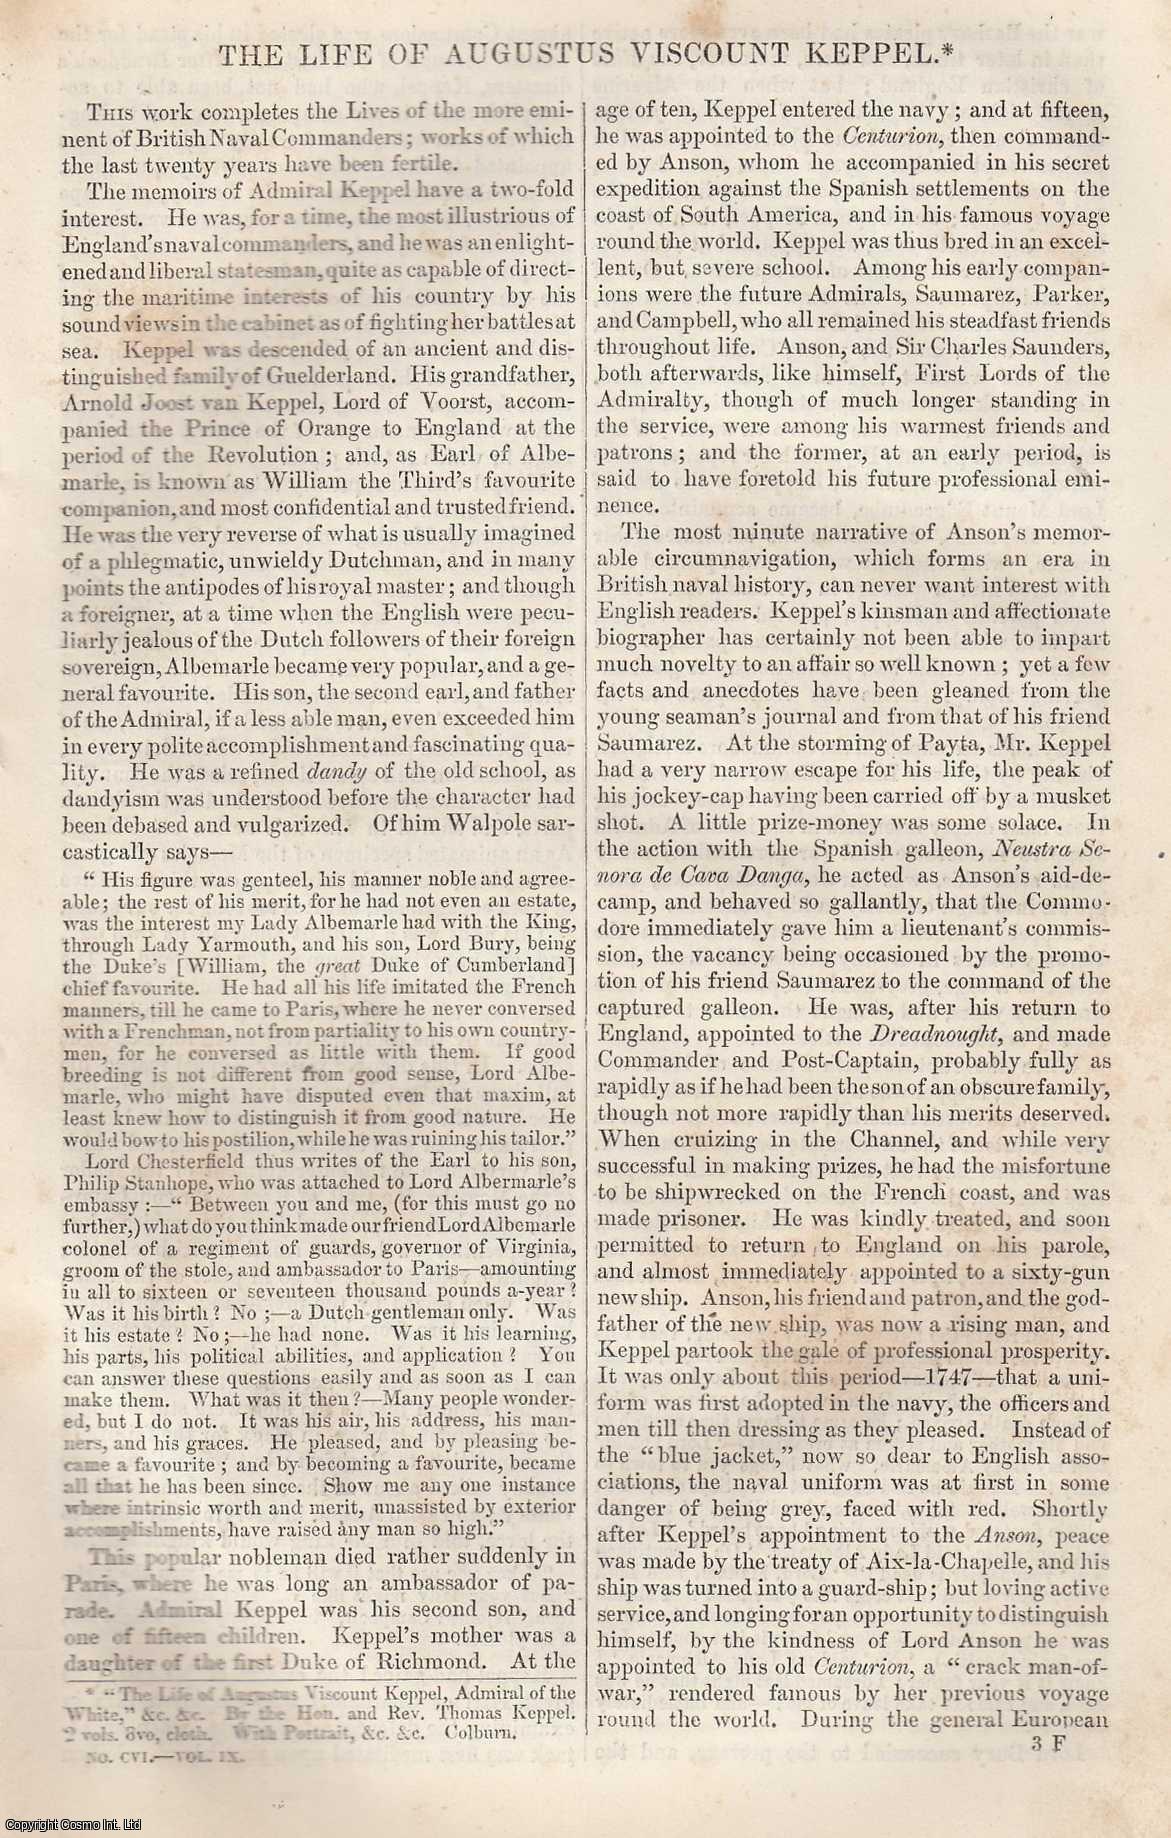 No Author Stated - The Life of Augustus Viscount Keppel. An original article from Tait's Edinburgh Magazine, 1842.